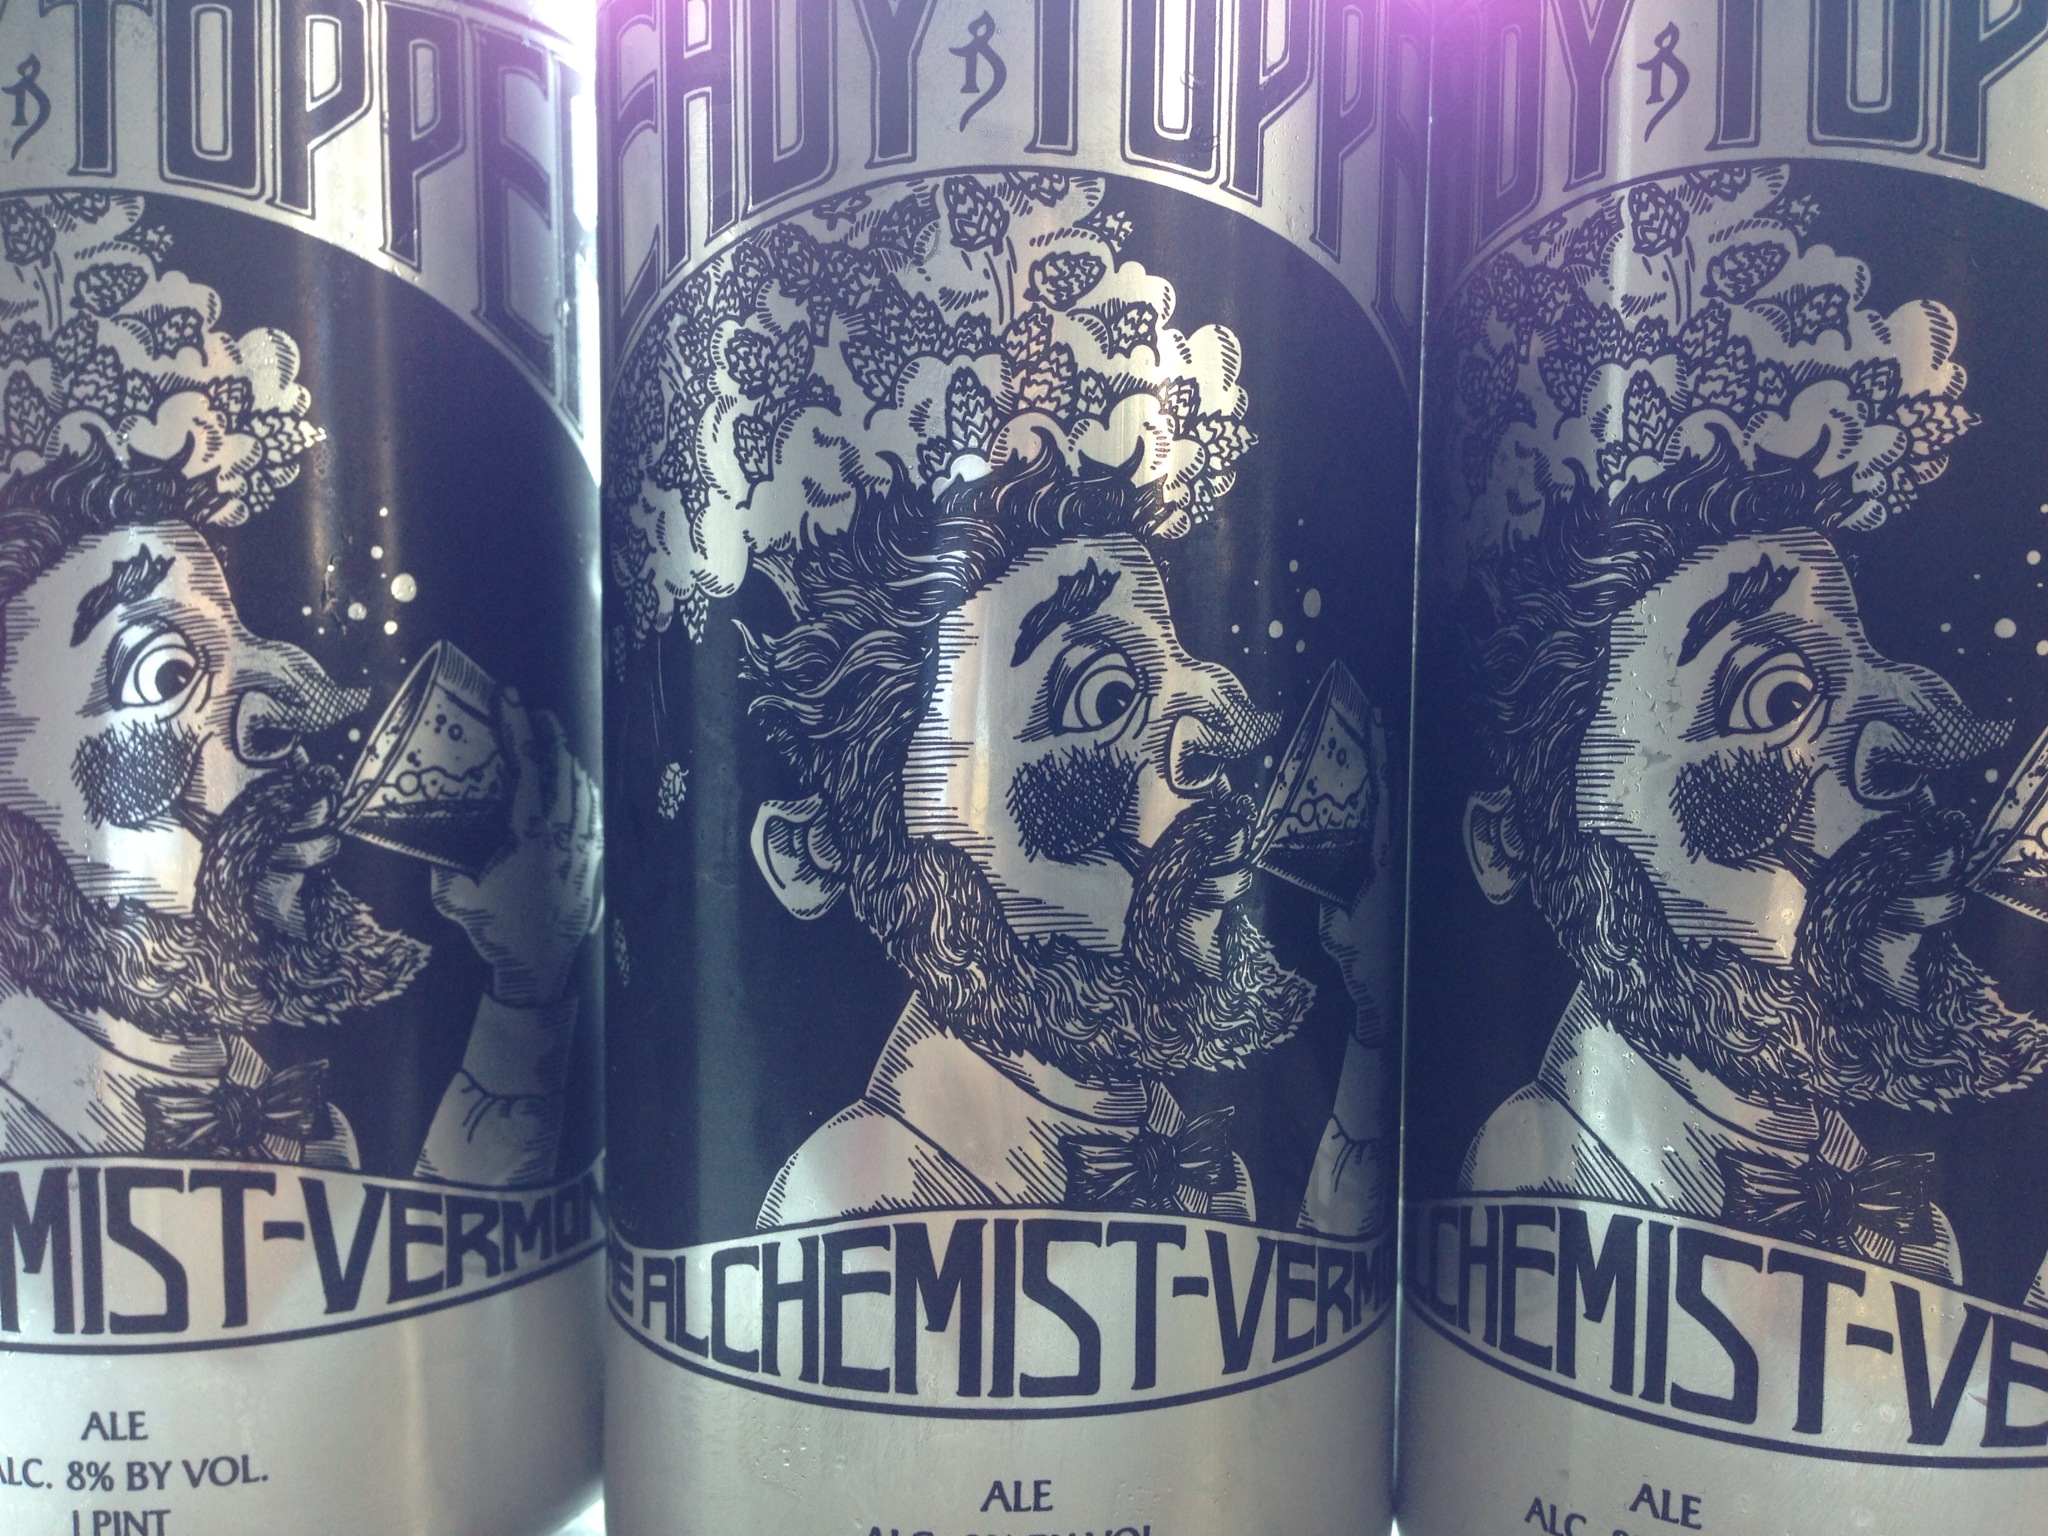 The Alchemist Brewery – Heady Topper